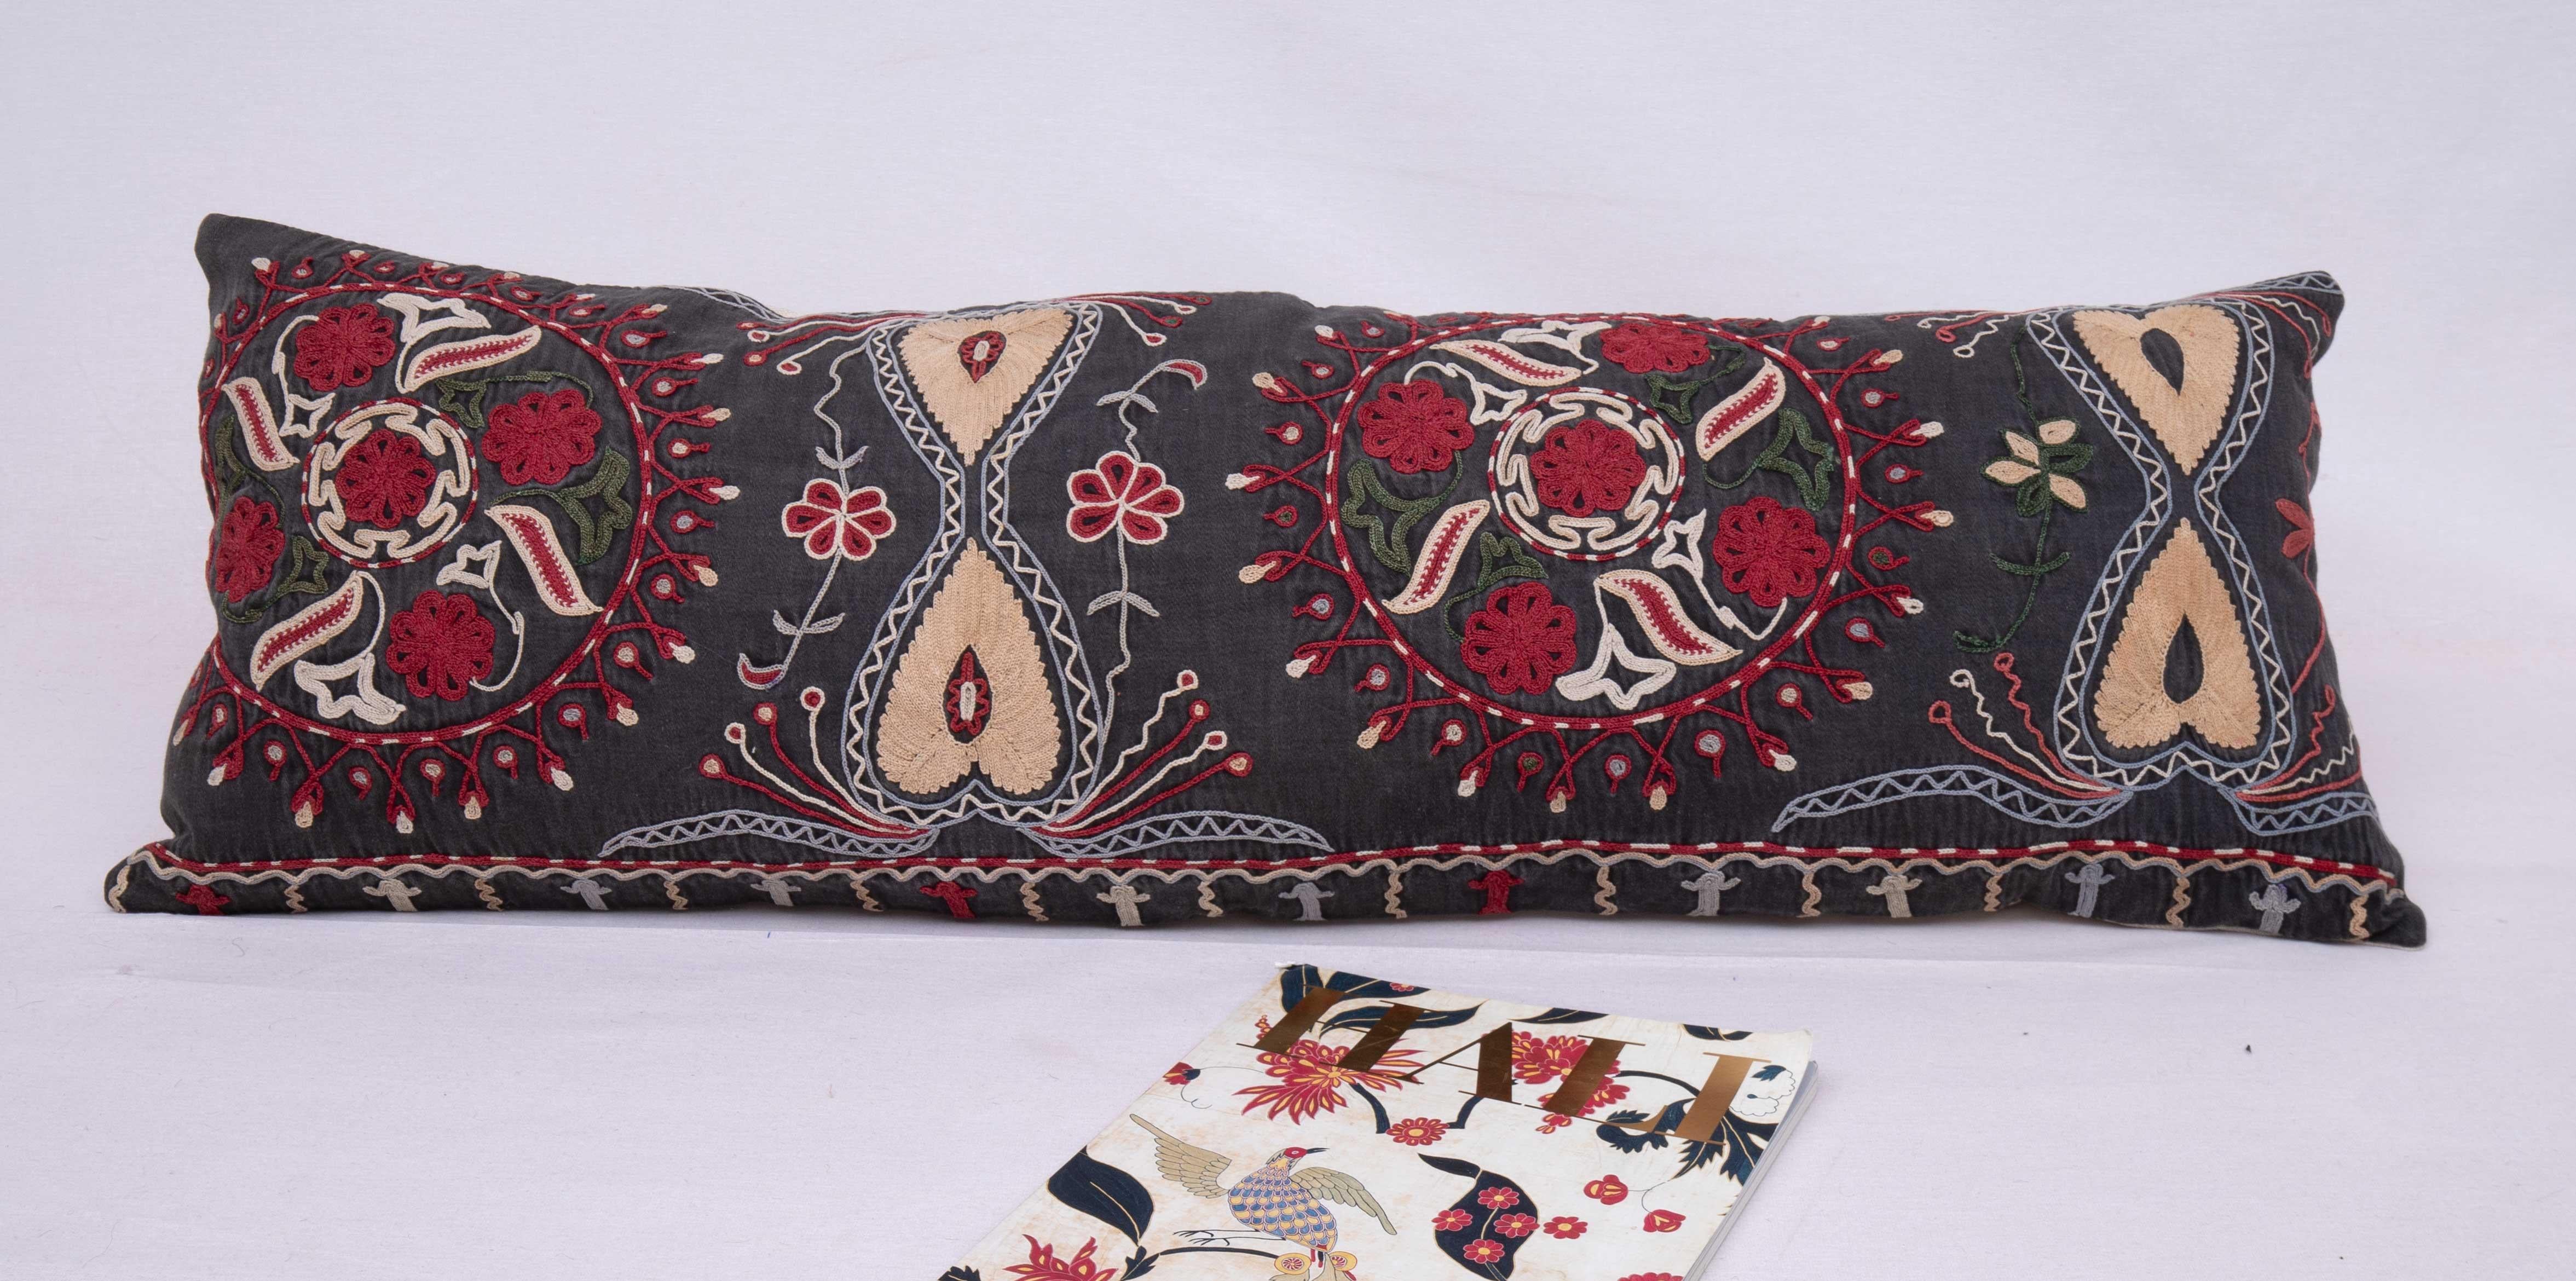 Suzani Lumbar Pillowcase Made from a Mid-20th C, Kazak / Kyrgyz Embroidery For Sale